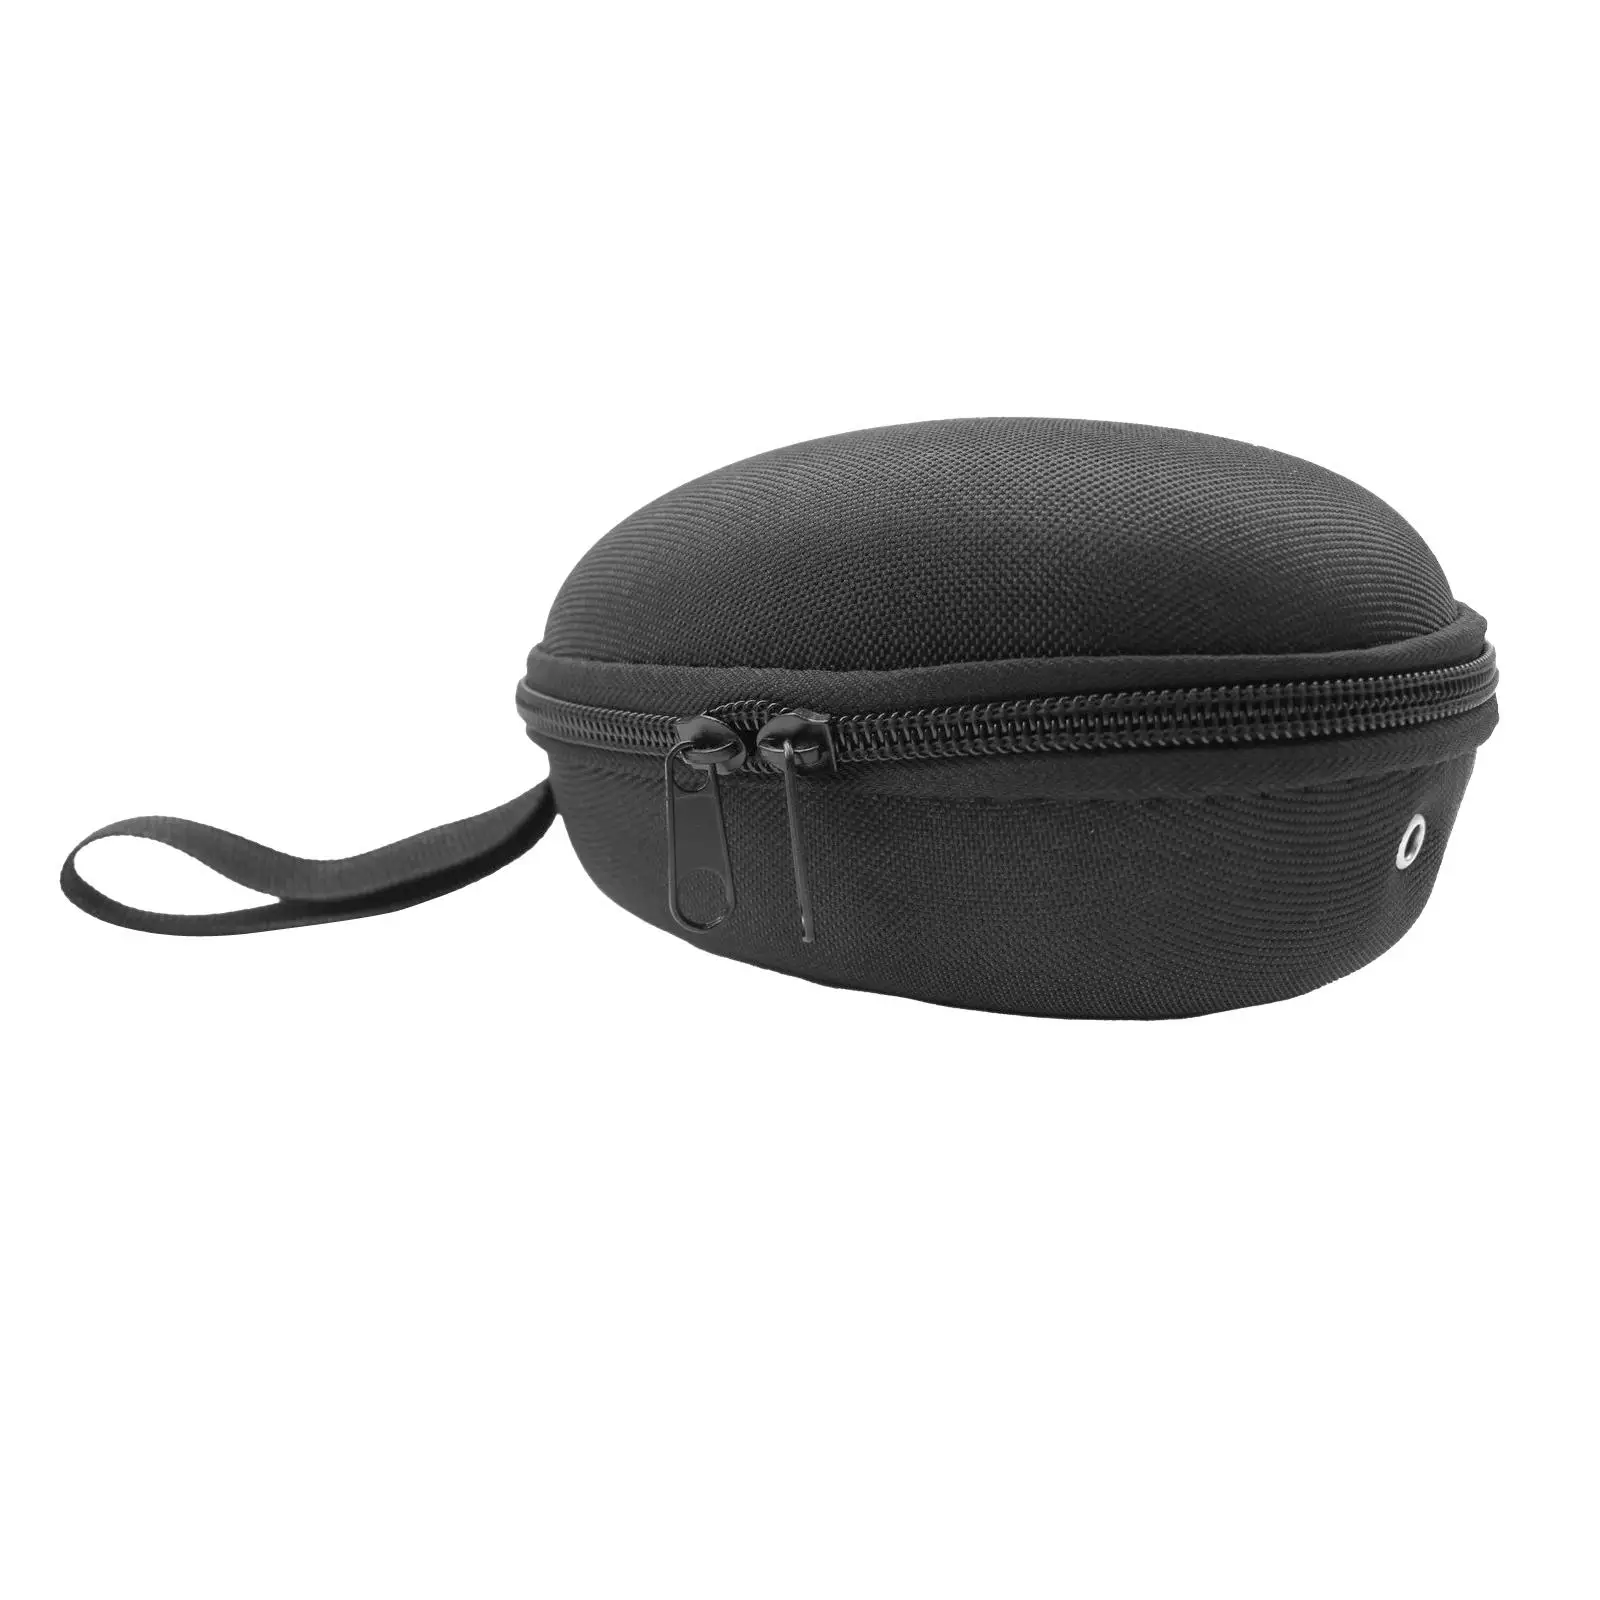 Fishing Reel Bag Fishing Gear Organizer Tackle Box Protective Case Black Storage Bag Pouch for Bait Casting Fishing Tool Drum